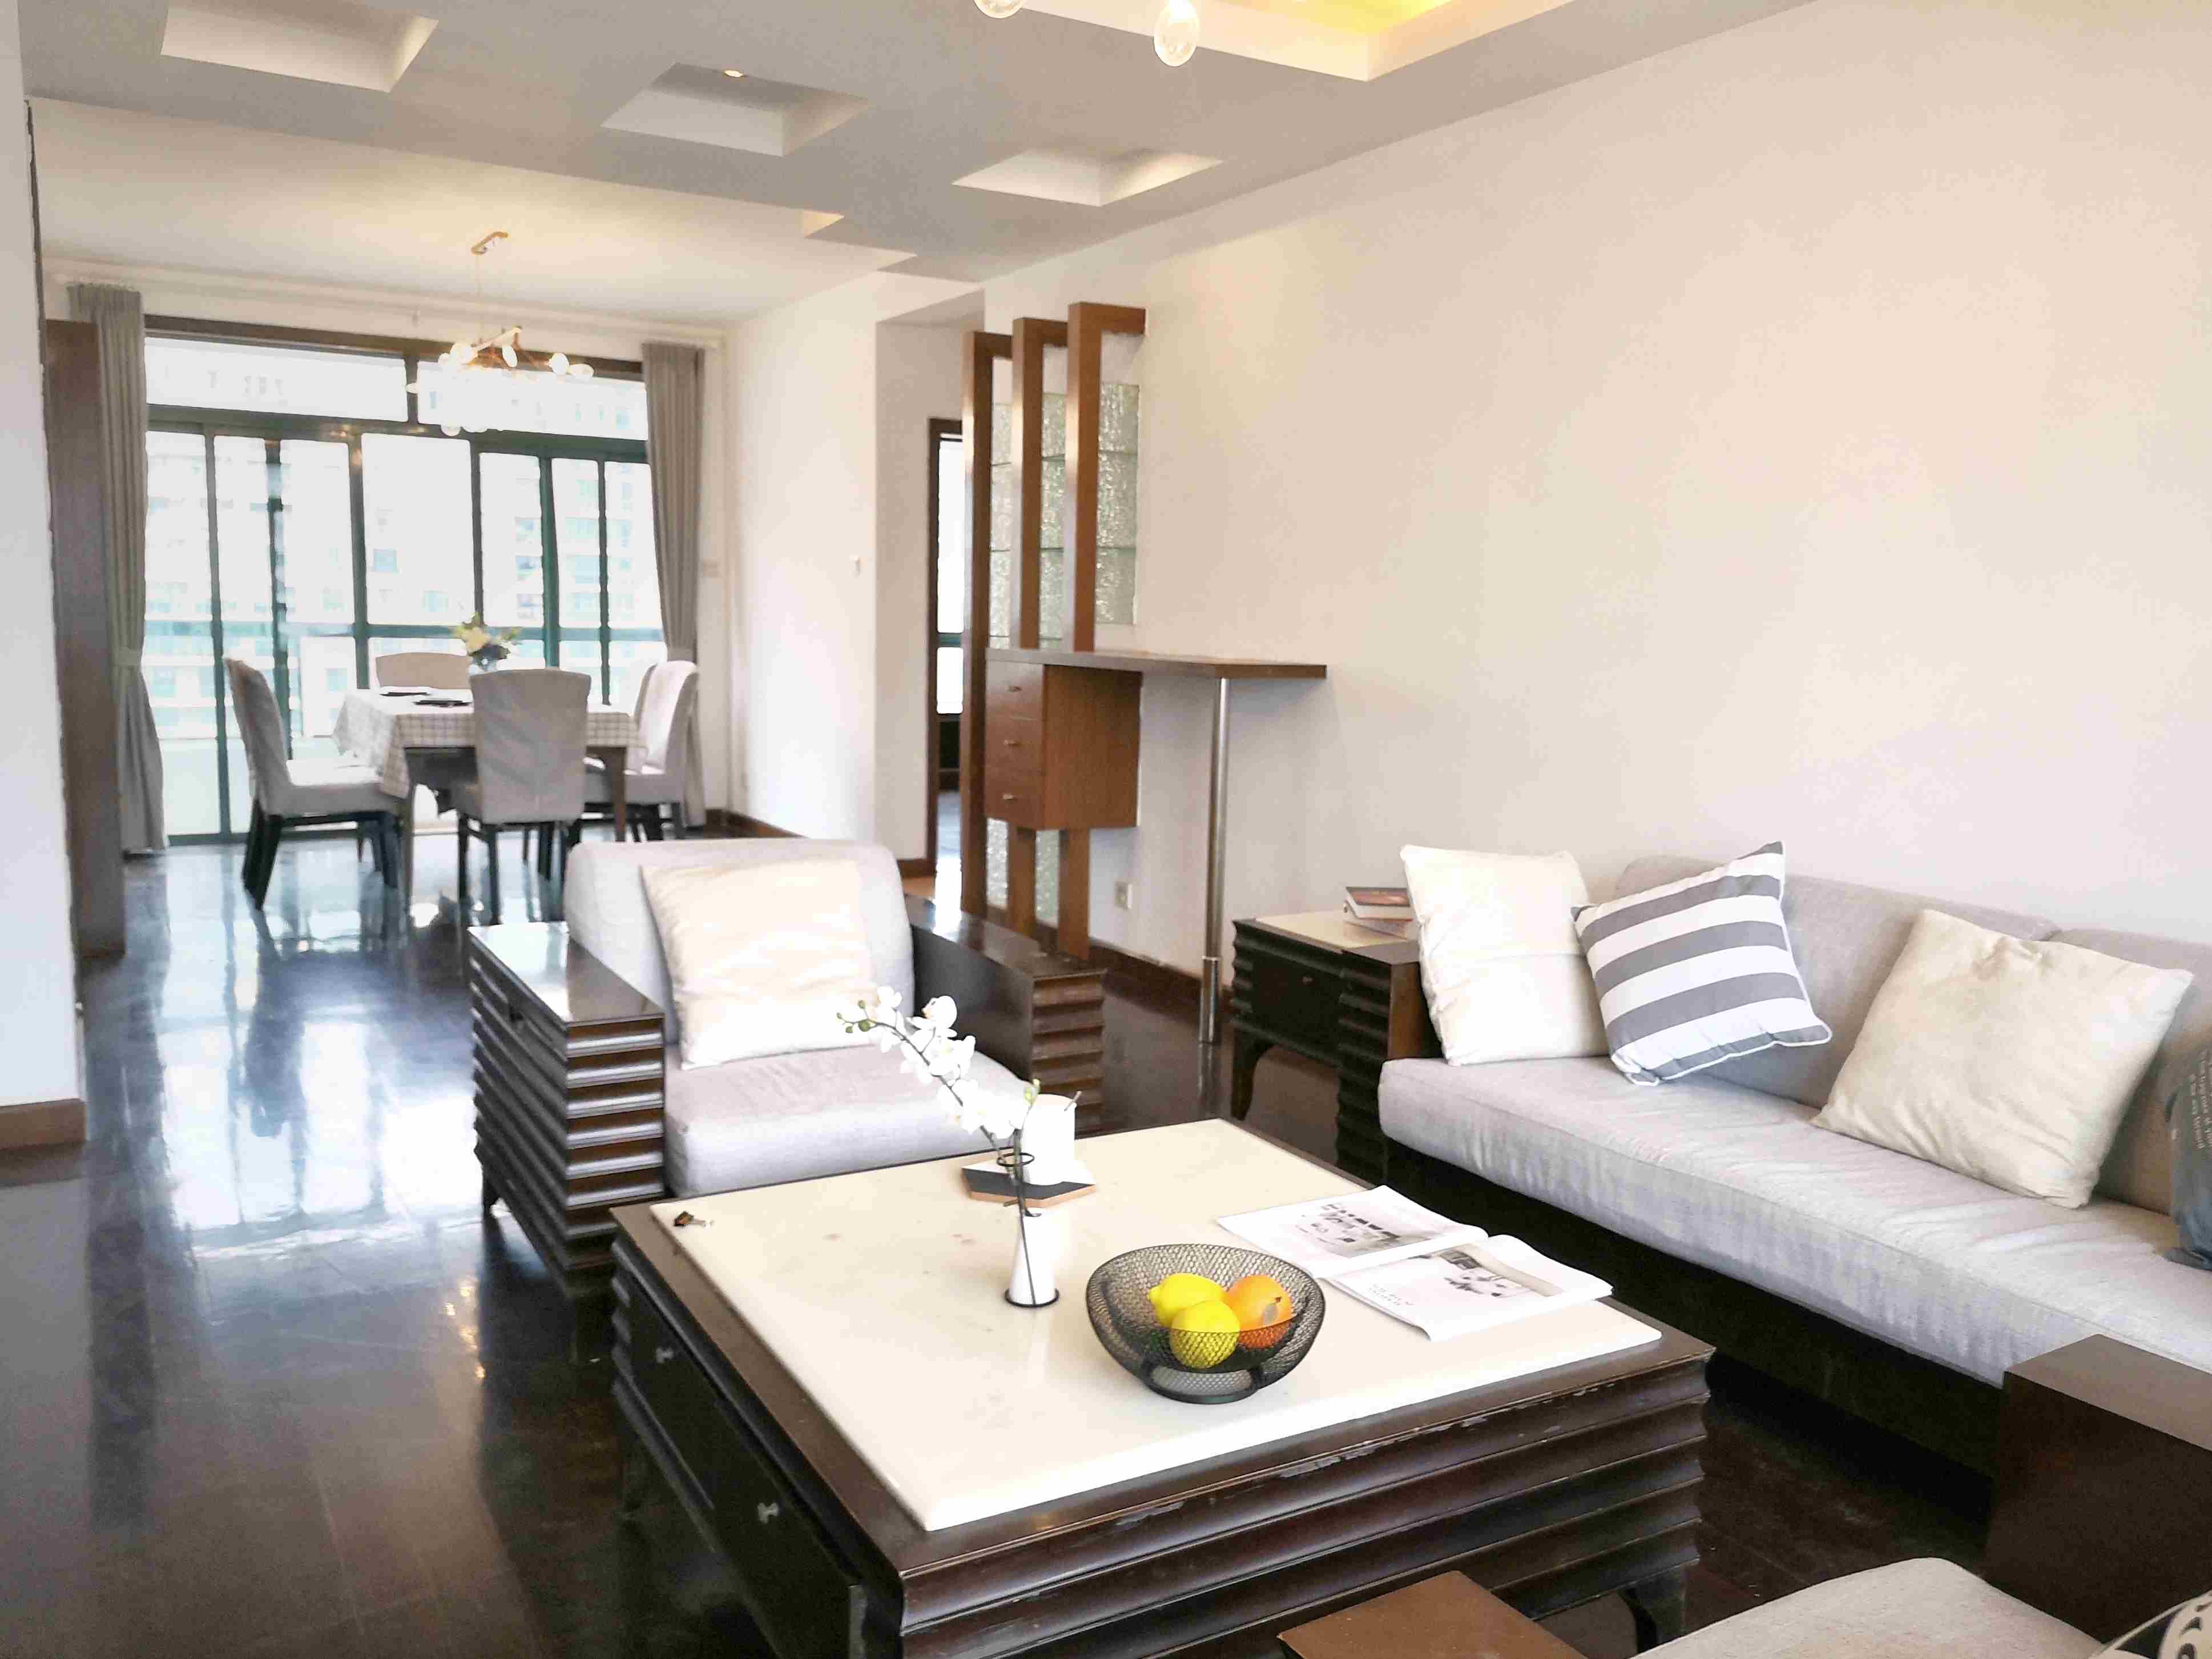 Large living area Bright Spacious 3BR Apt for Rent nr Suzhou Creek in Shanghai